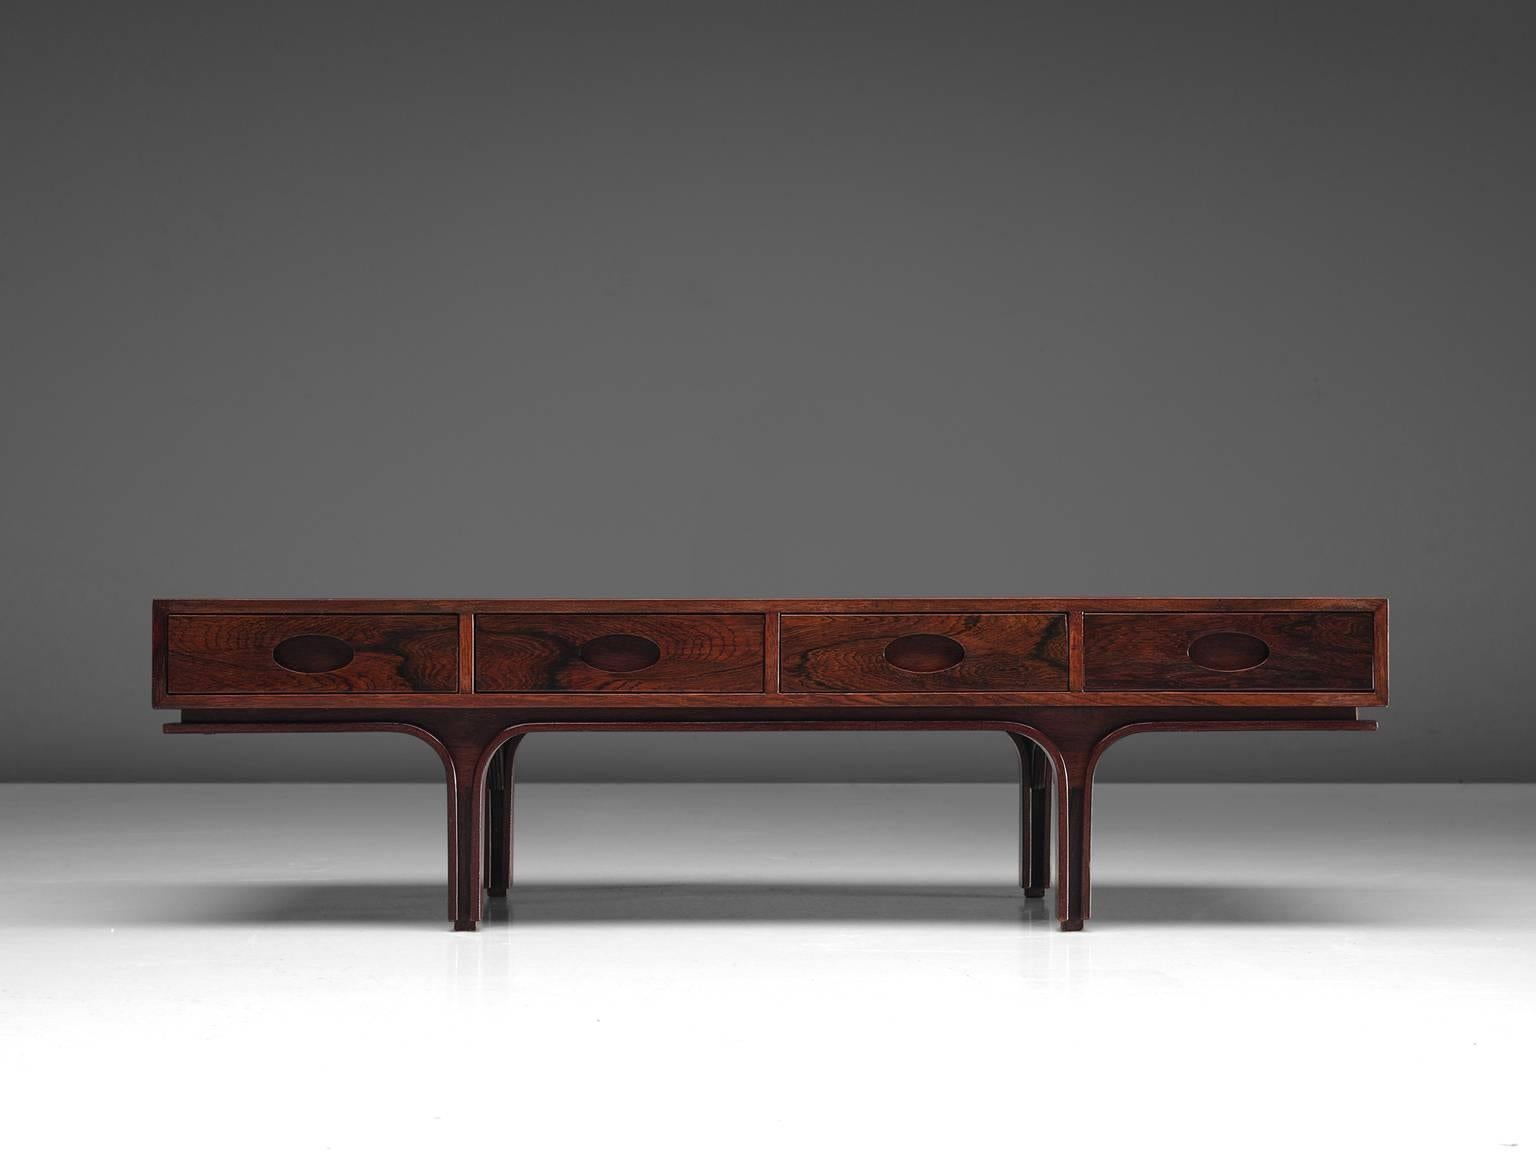 Gianfranco Frattini for Bernini, low board or coffee table, rosewood, Italy, 1960s.

This coffee table in rosewood is designed by Frattini. It features the typical design traits of Frattini such as the four drawers with stretched handle but also the